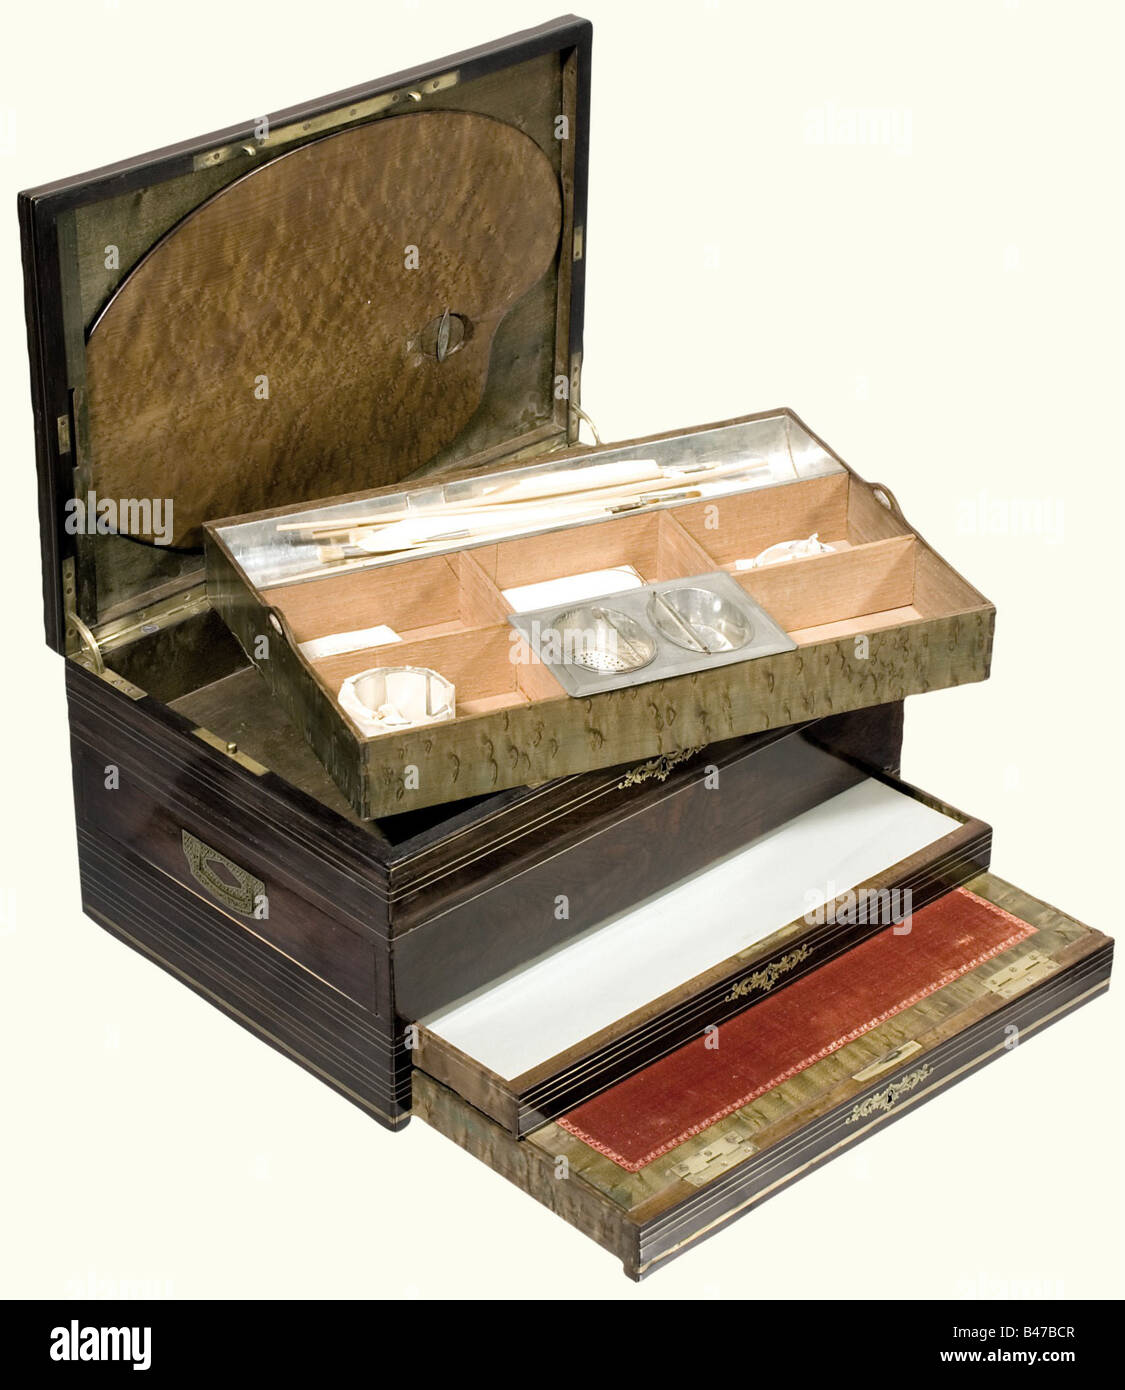 Sophie-Marie Duchess of Baden - a traveling paint box, Deforge & Carpentier, Paris, circa 1880. Lavishly worked walnut case with several levels and with surrounding brass bands. Ornamental brass inlays in Boulle technique on the lid, displaying the ducal coronet above an alloy 'SM'. In the lid, a (slightly cracked) palette of bird's-eye maple. Inside a removable box with an iron water container, a porcelain mix holder, a brush, and a variety of large, ivory painting surfaces. In front and on the side there are two lockable drawers with colours, charcoal pencils, Stock Photo